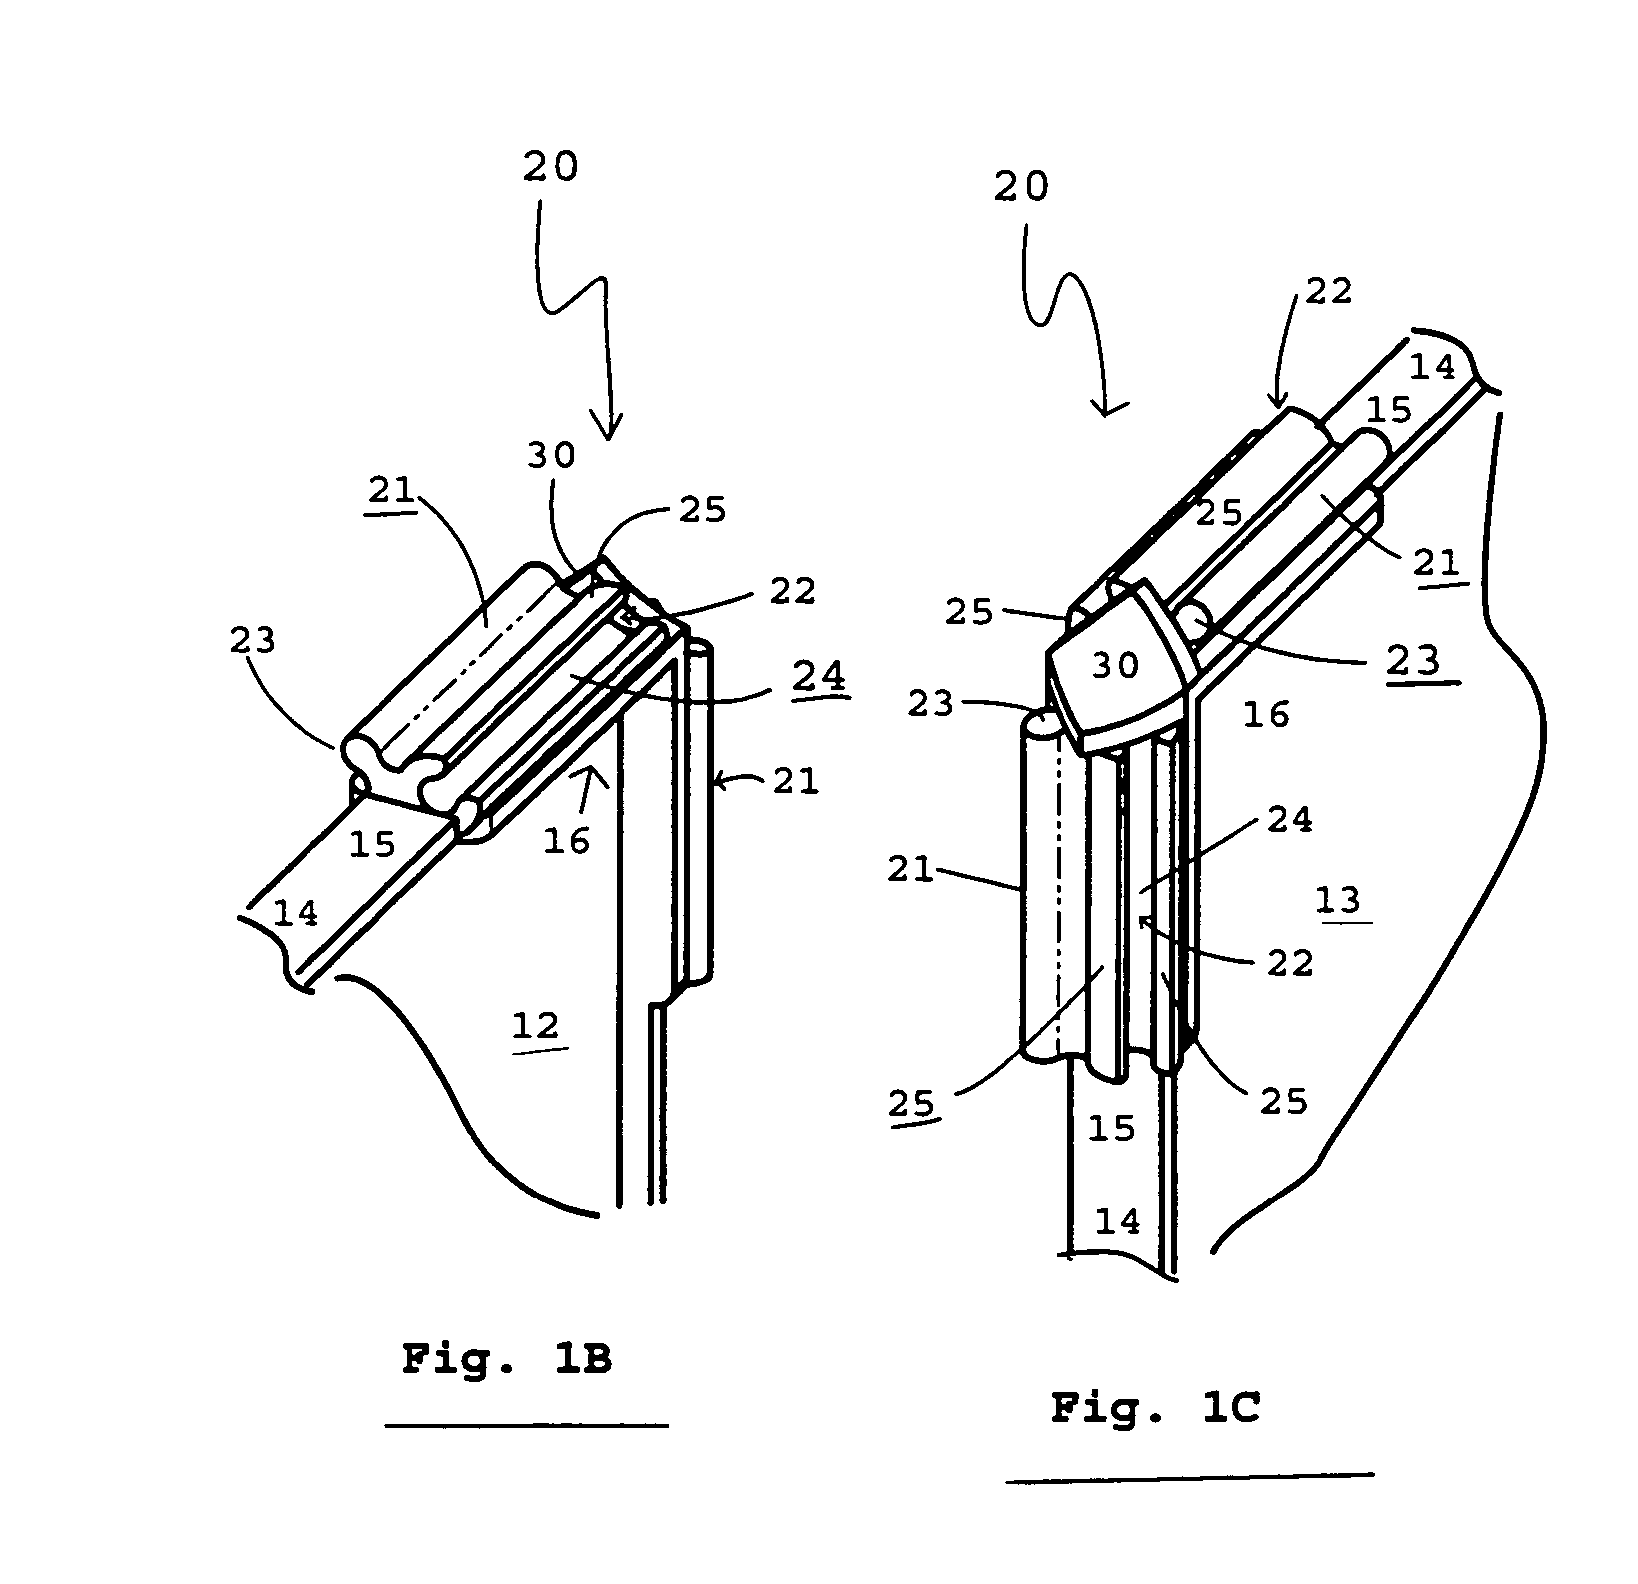 Panel cover attachments to snap together connectors